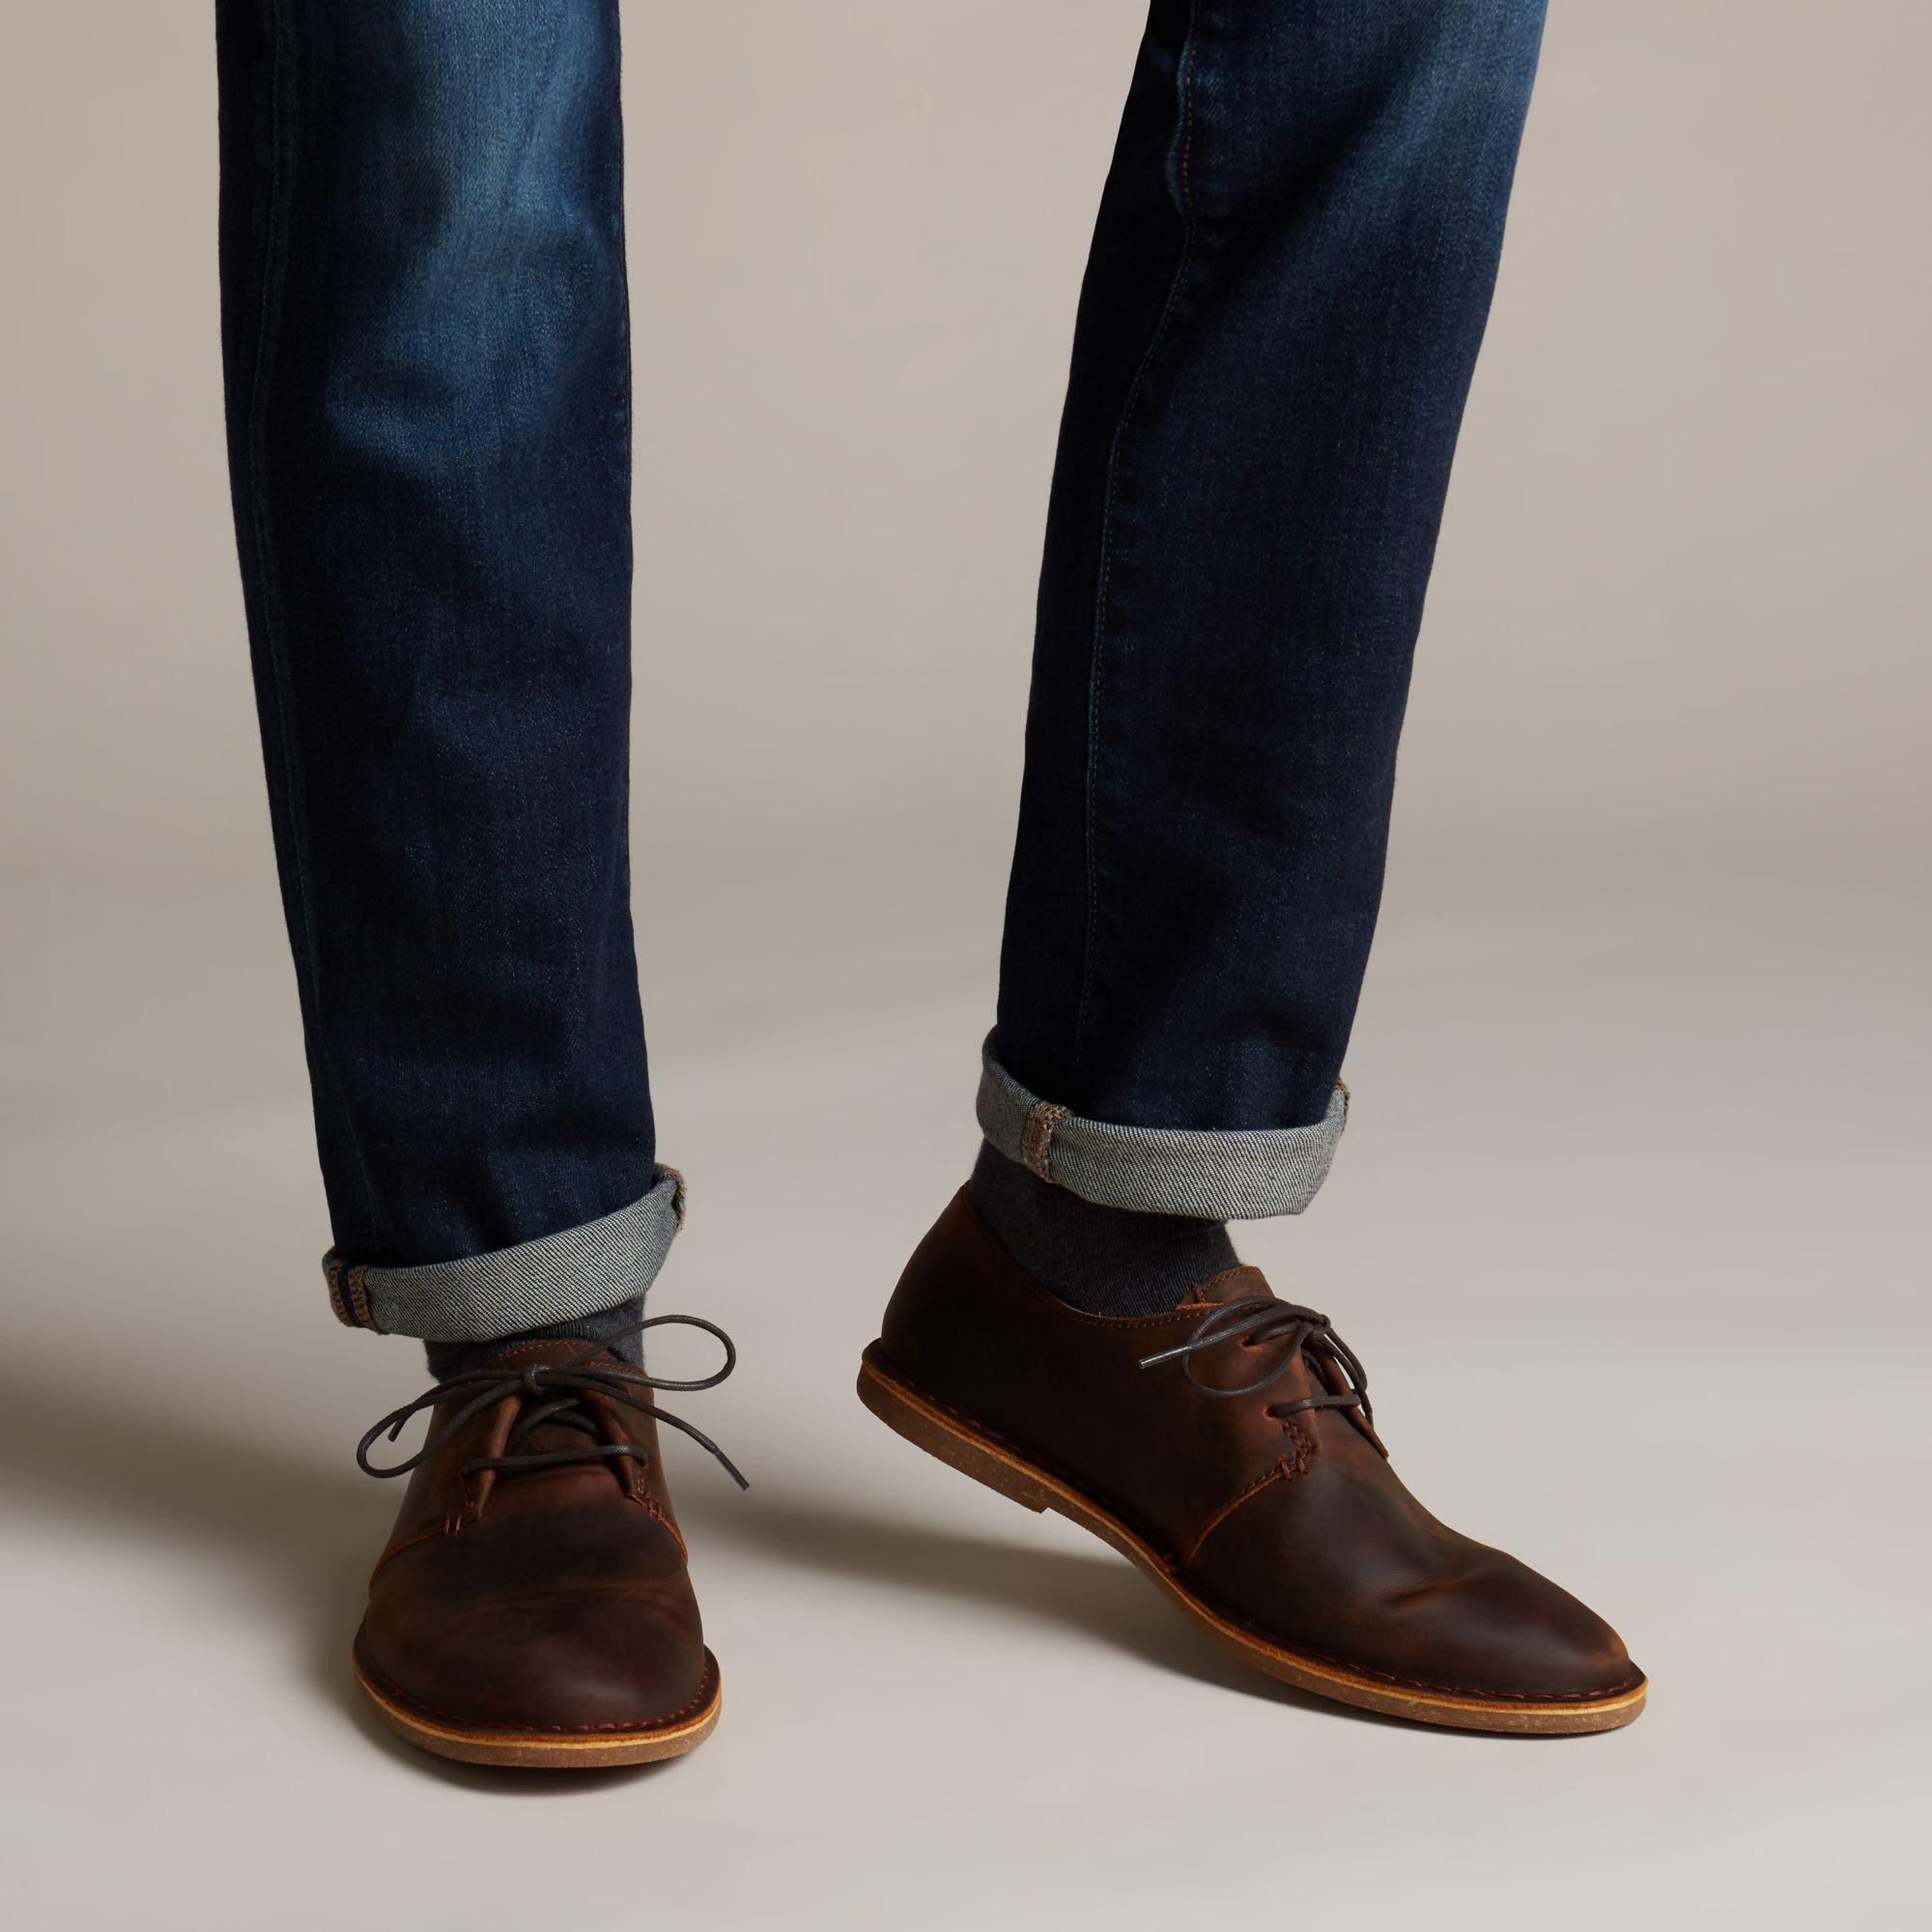 clarks baltimore beeswax